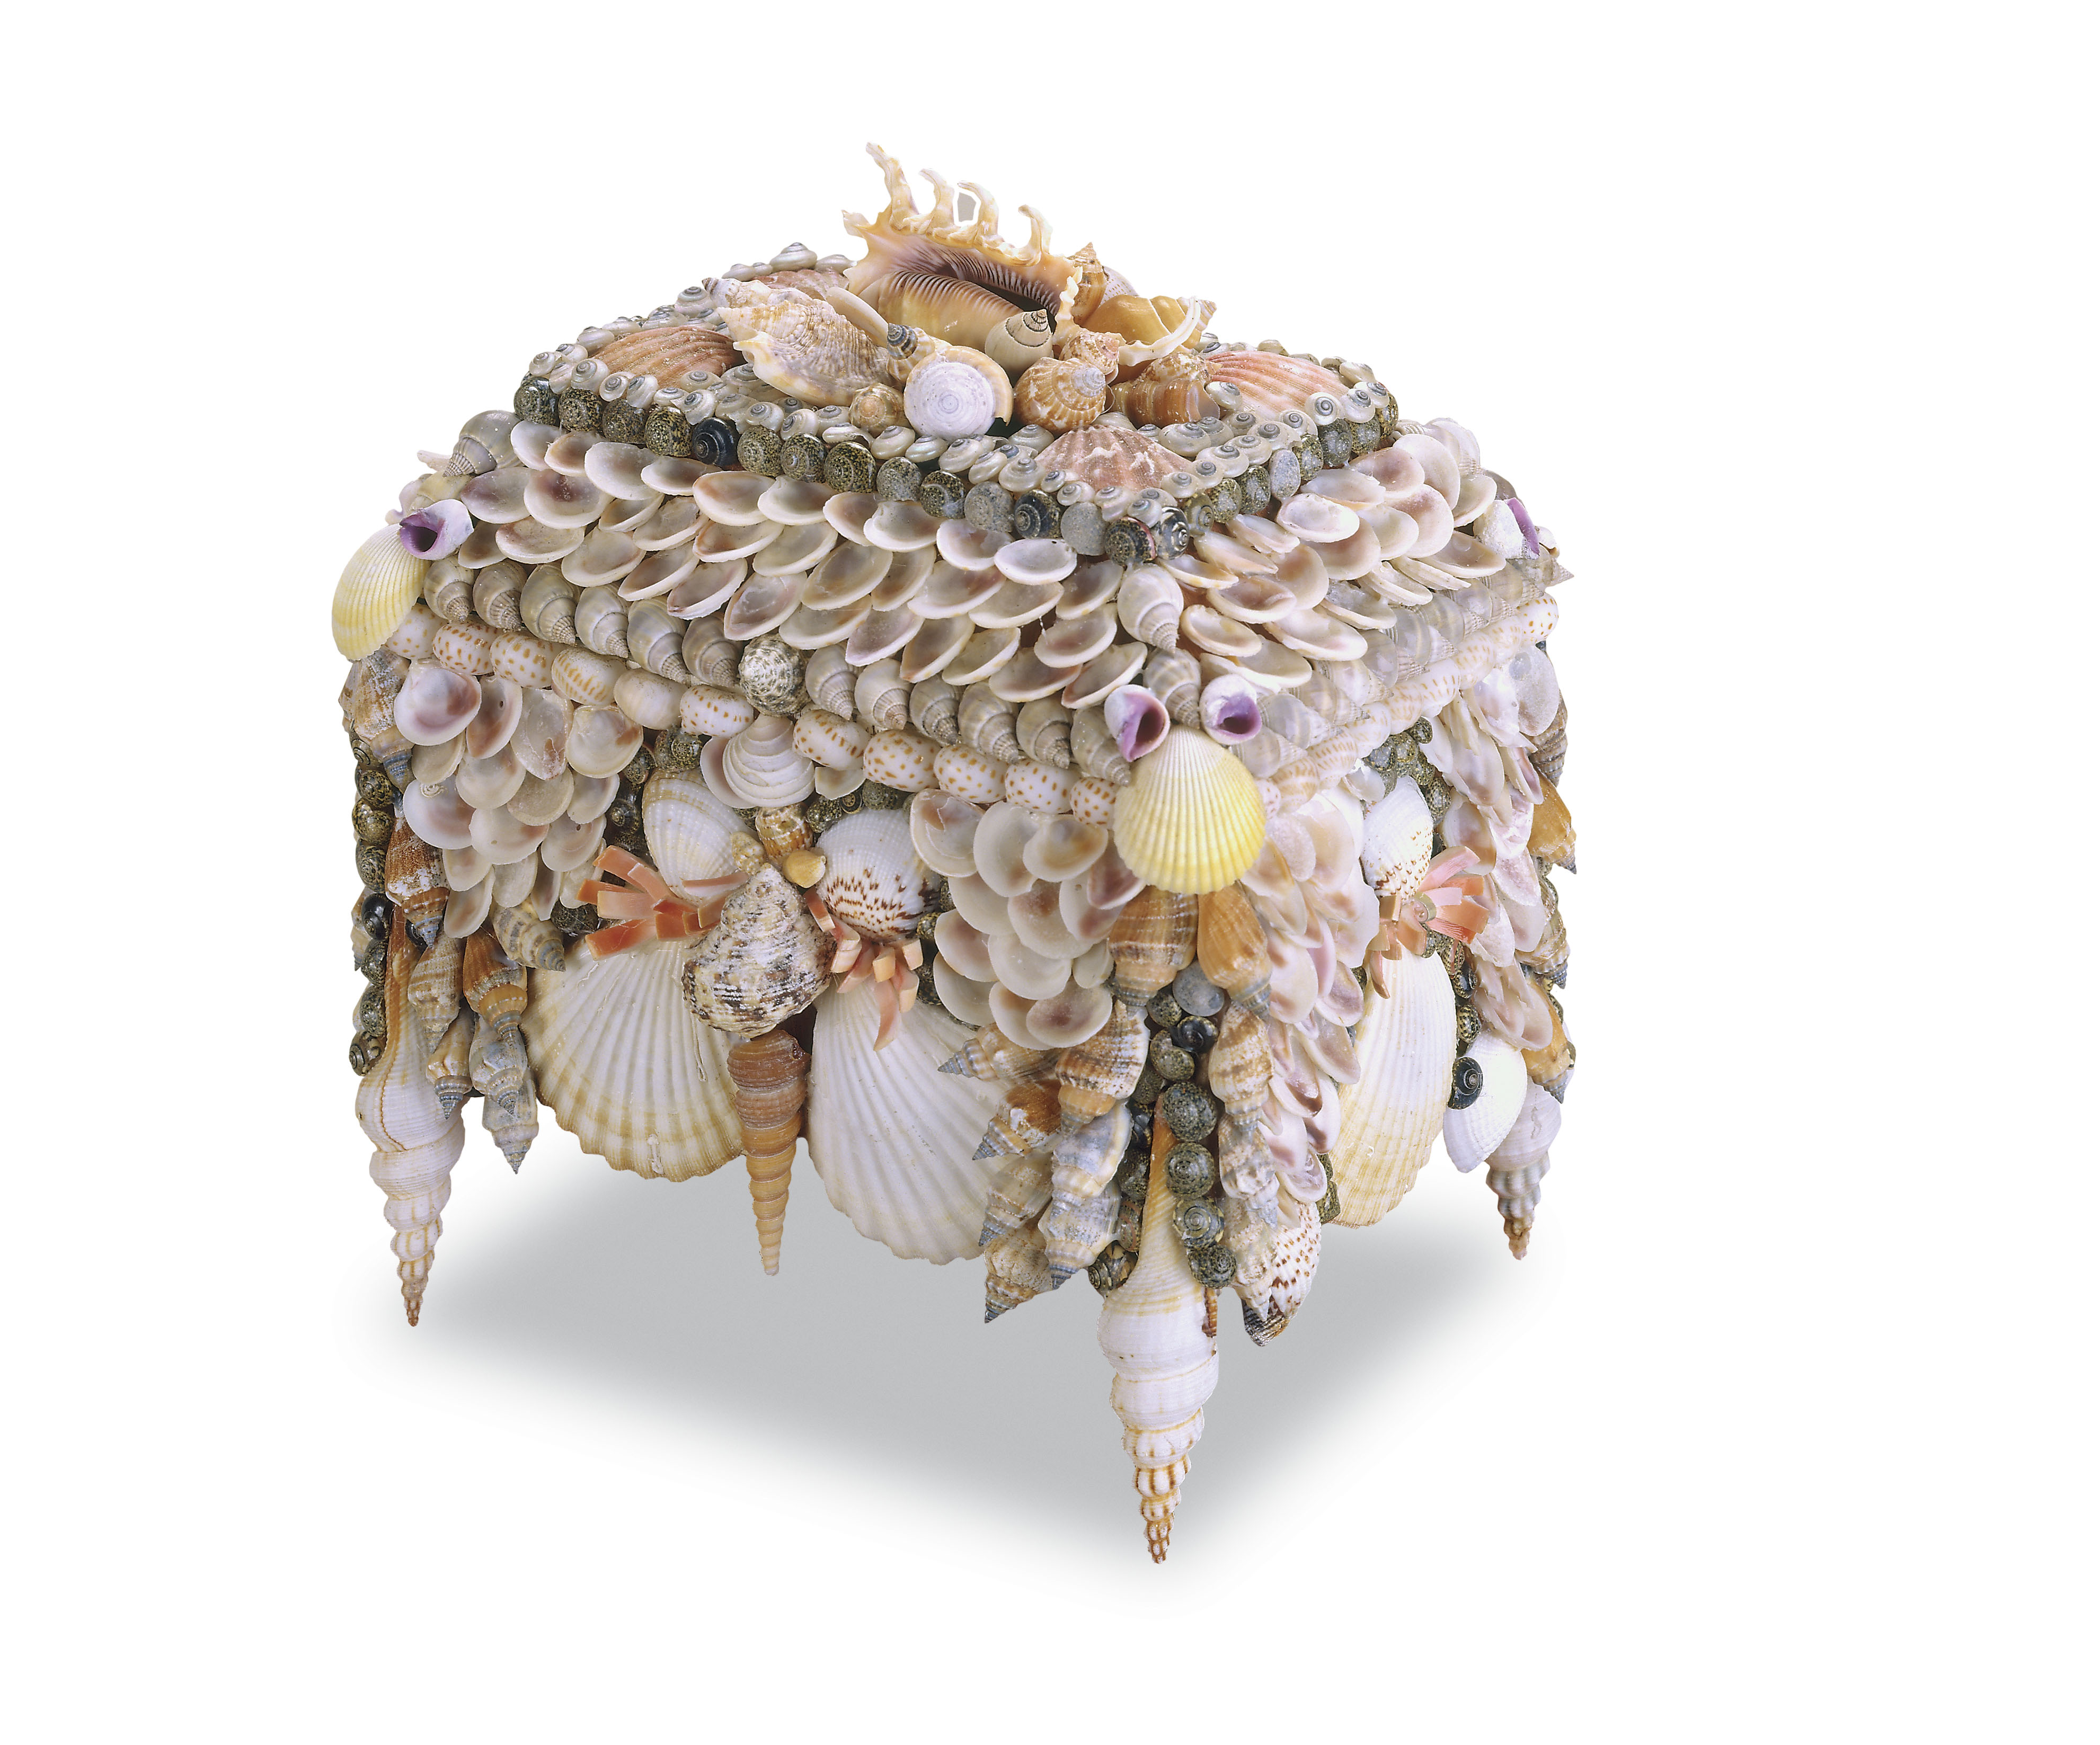 Boardwalk jewelry box covered in shells from Currey & Co.